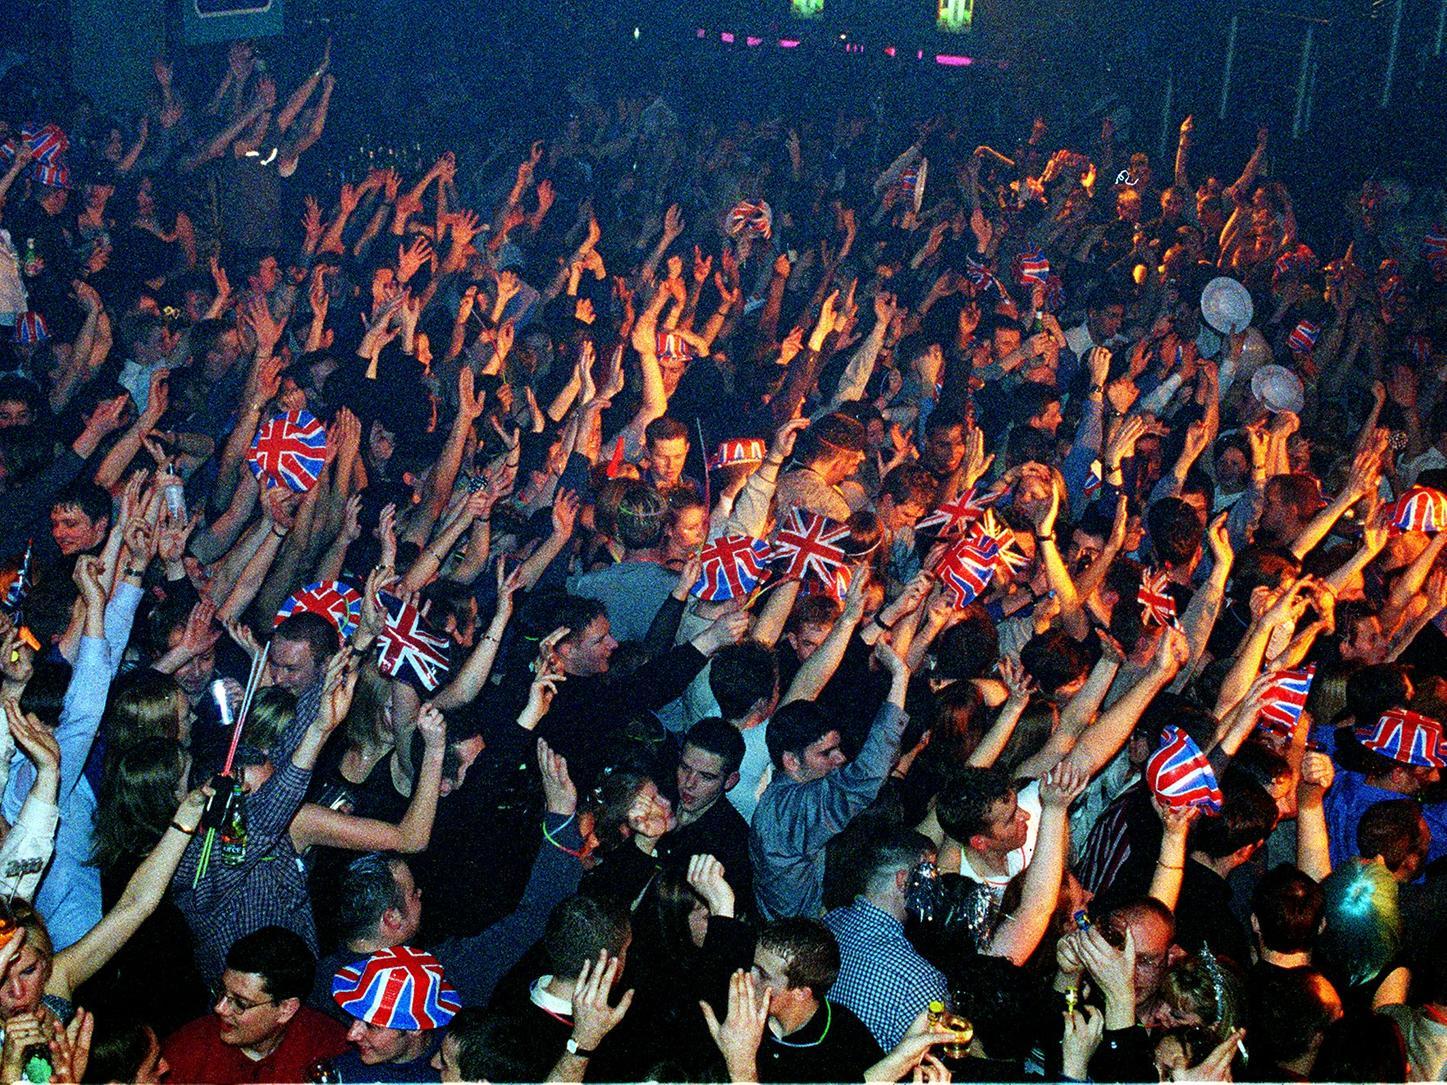 Were you inside Majestyk on New Year's Eve in 1999? Share your memories with Andrew Hutchinson via email at: andrew.hutchinson@jpress.co.uk or tweet him - @AndyHutchYPN